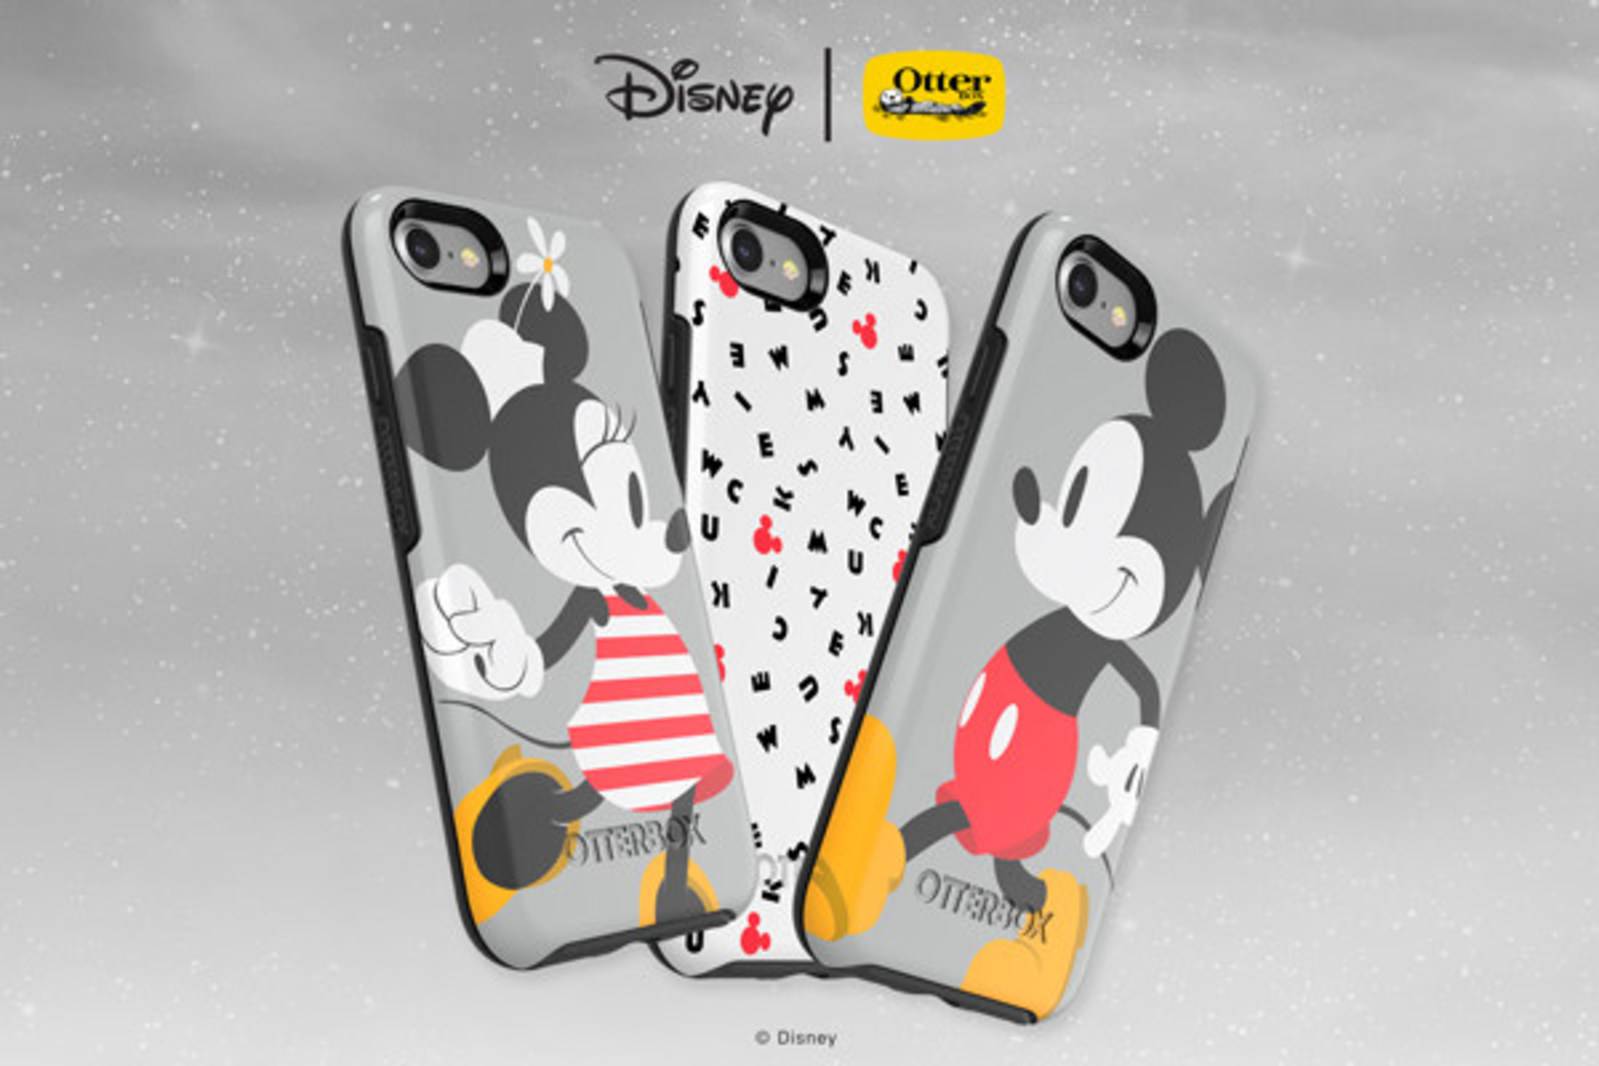 OtterBox becomes the 'Official Protective Case' of Walt Disney World Resort and Disneyland Resort